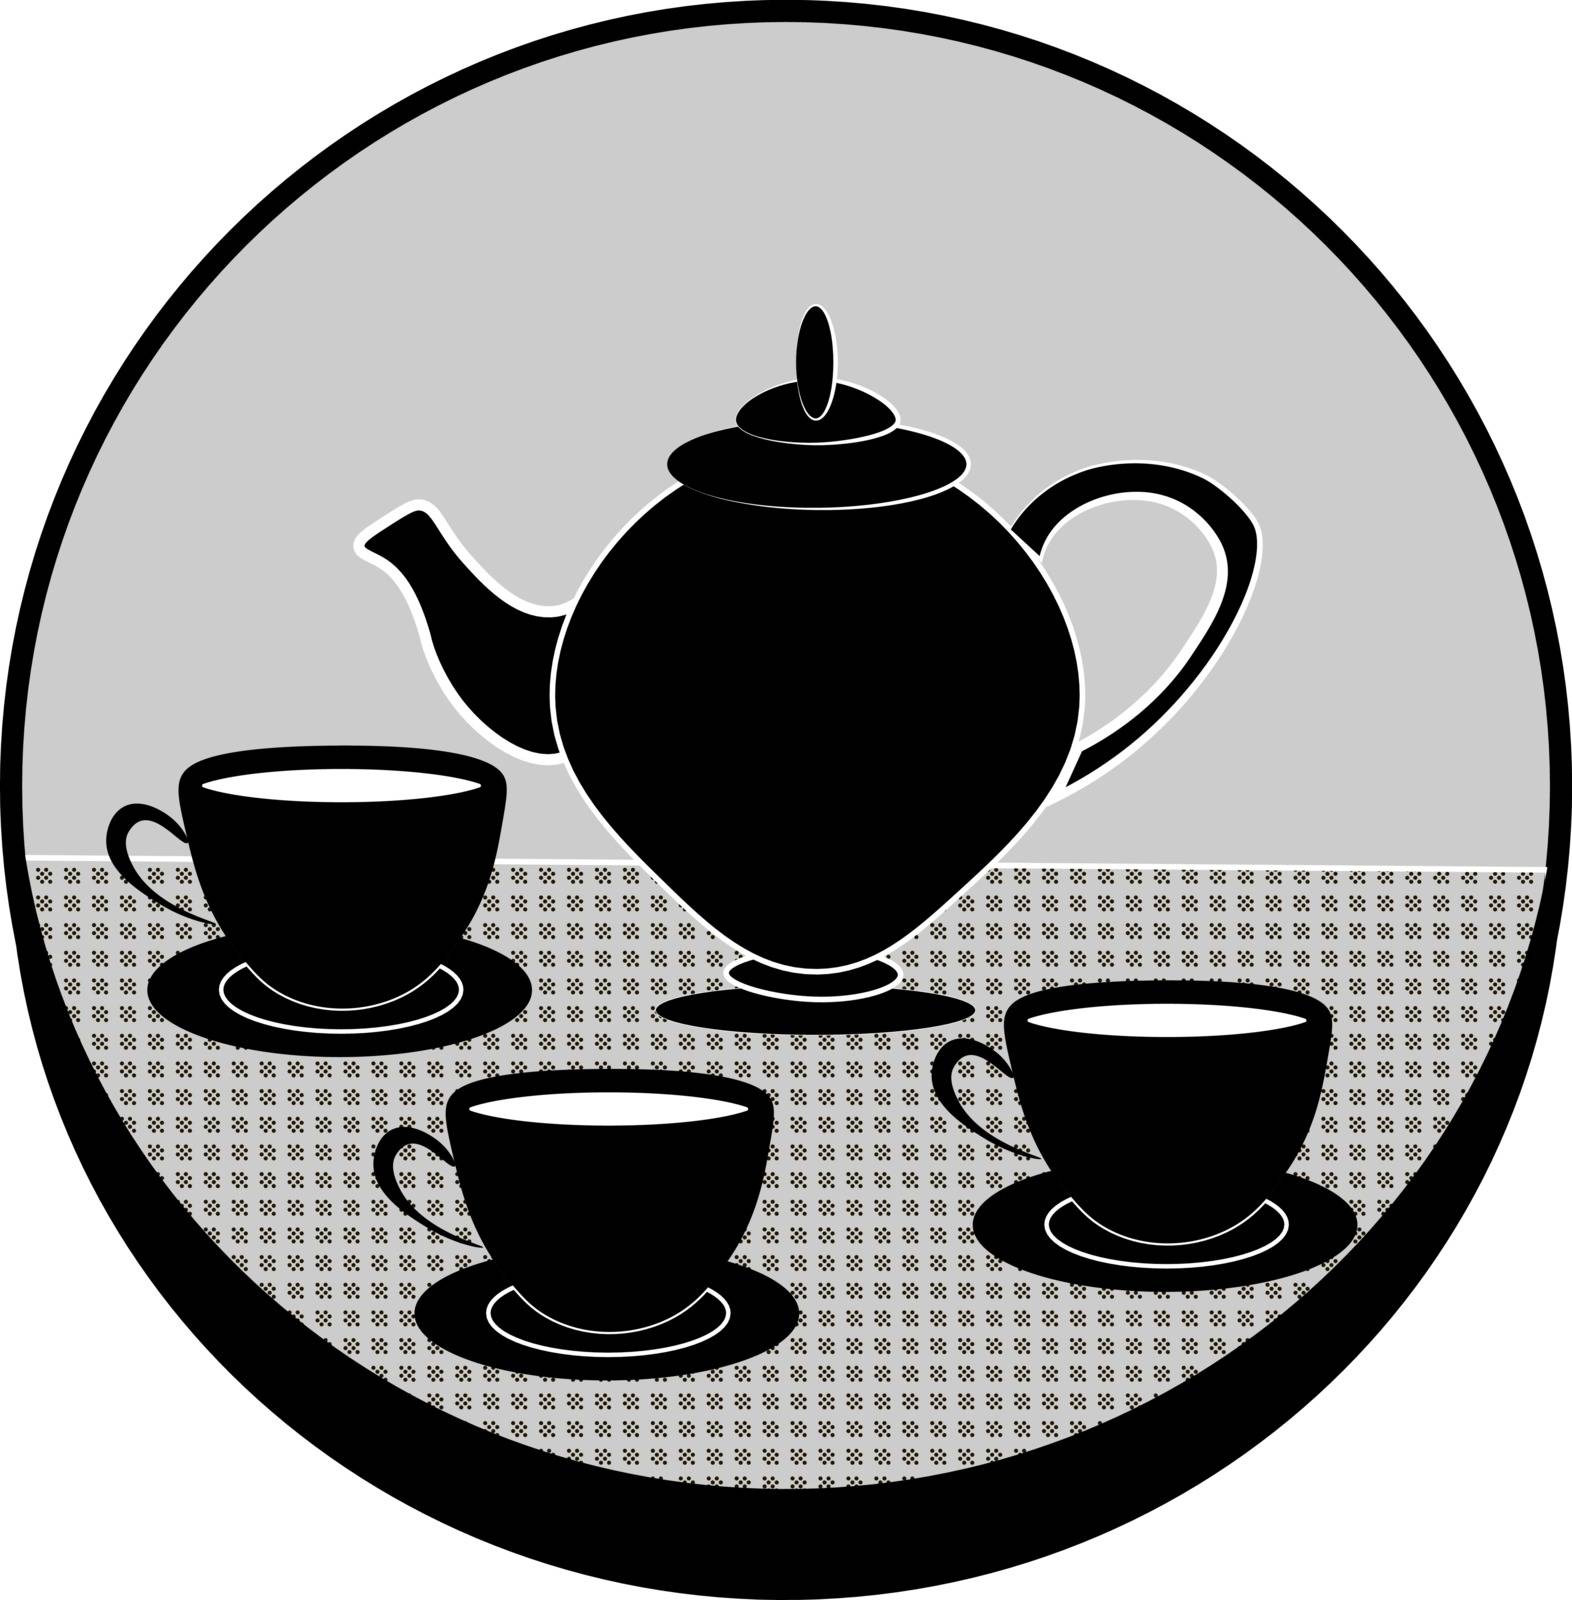 The black vintage teapot and three black cups of tea on the grey background by paranoido